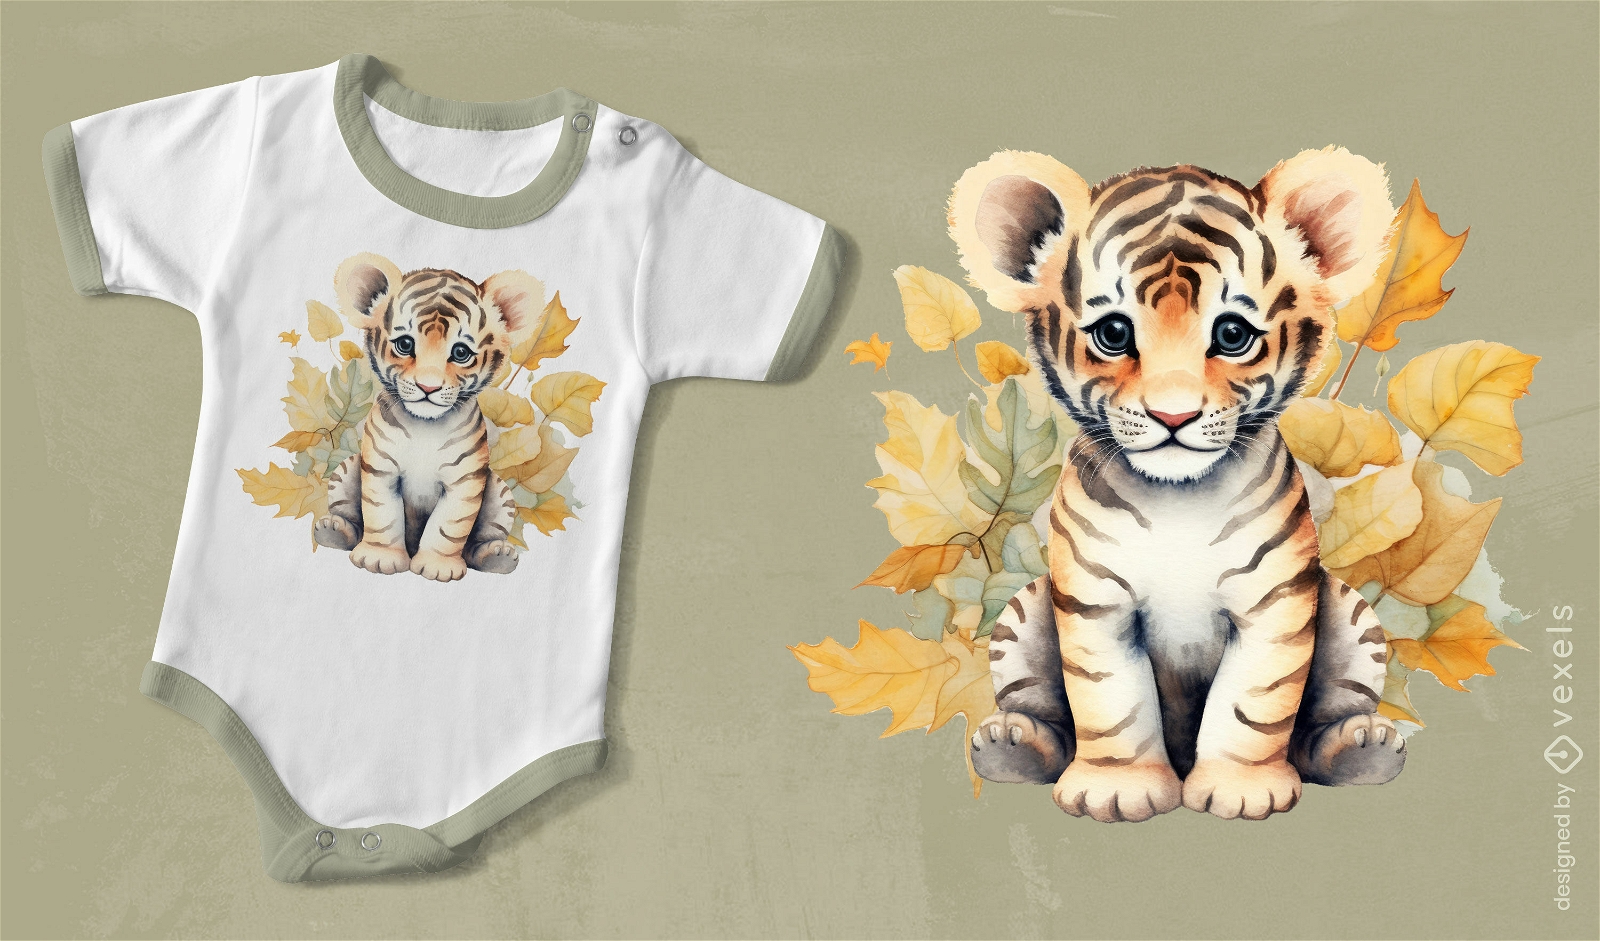 Baby-Tigerjunges-Tier-T-Shirt PSD